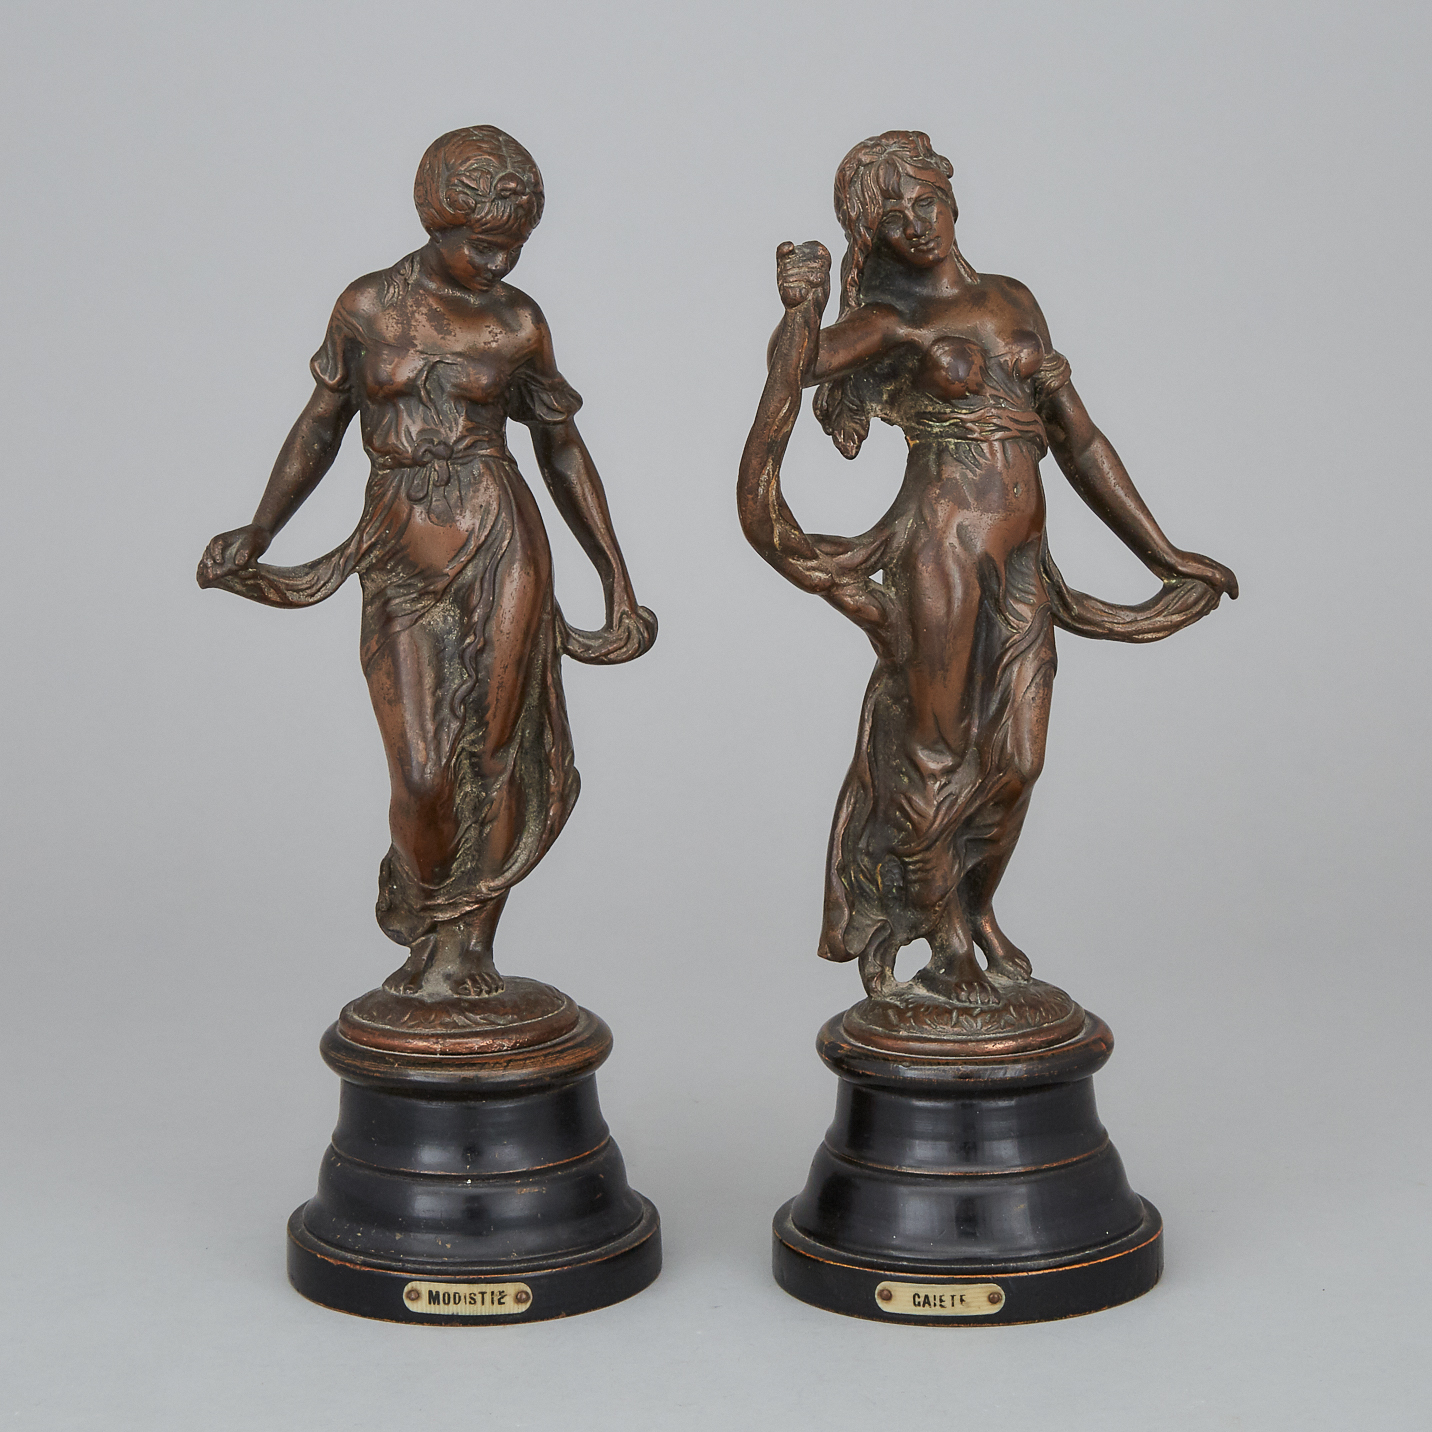 Pair of Victorian Allegorical Patinated Bronze Figures Titled 'Modiste' and 'Gaieté' 19th century